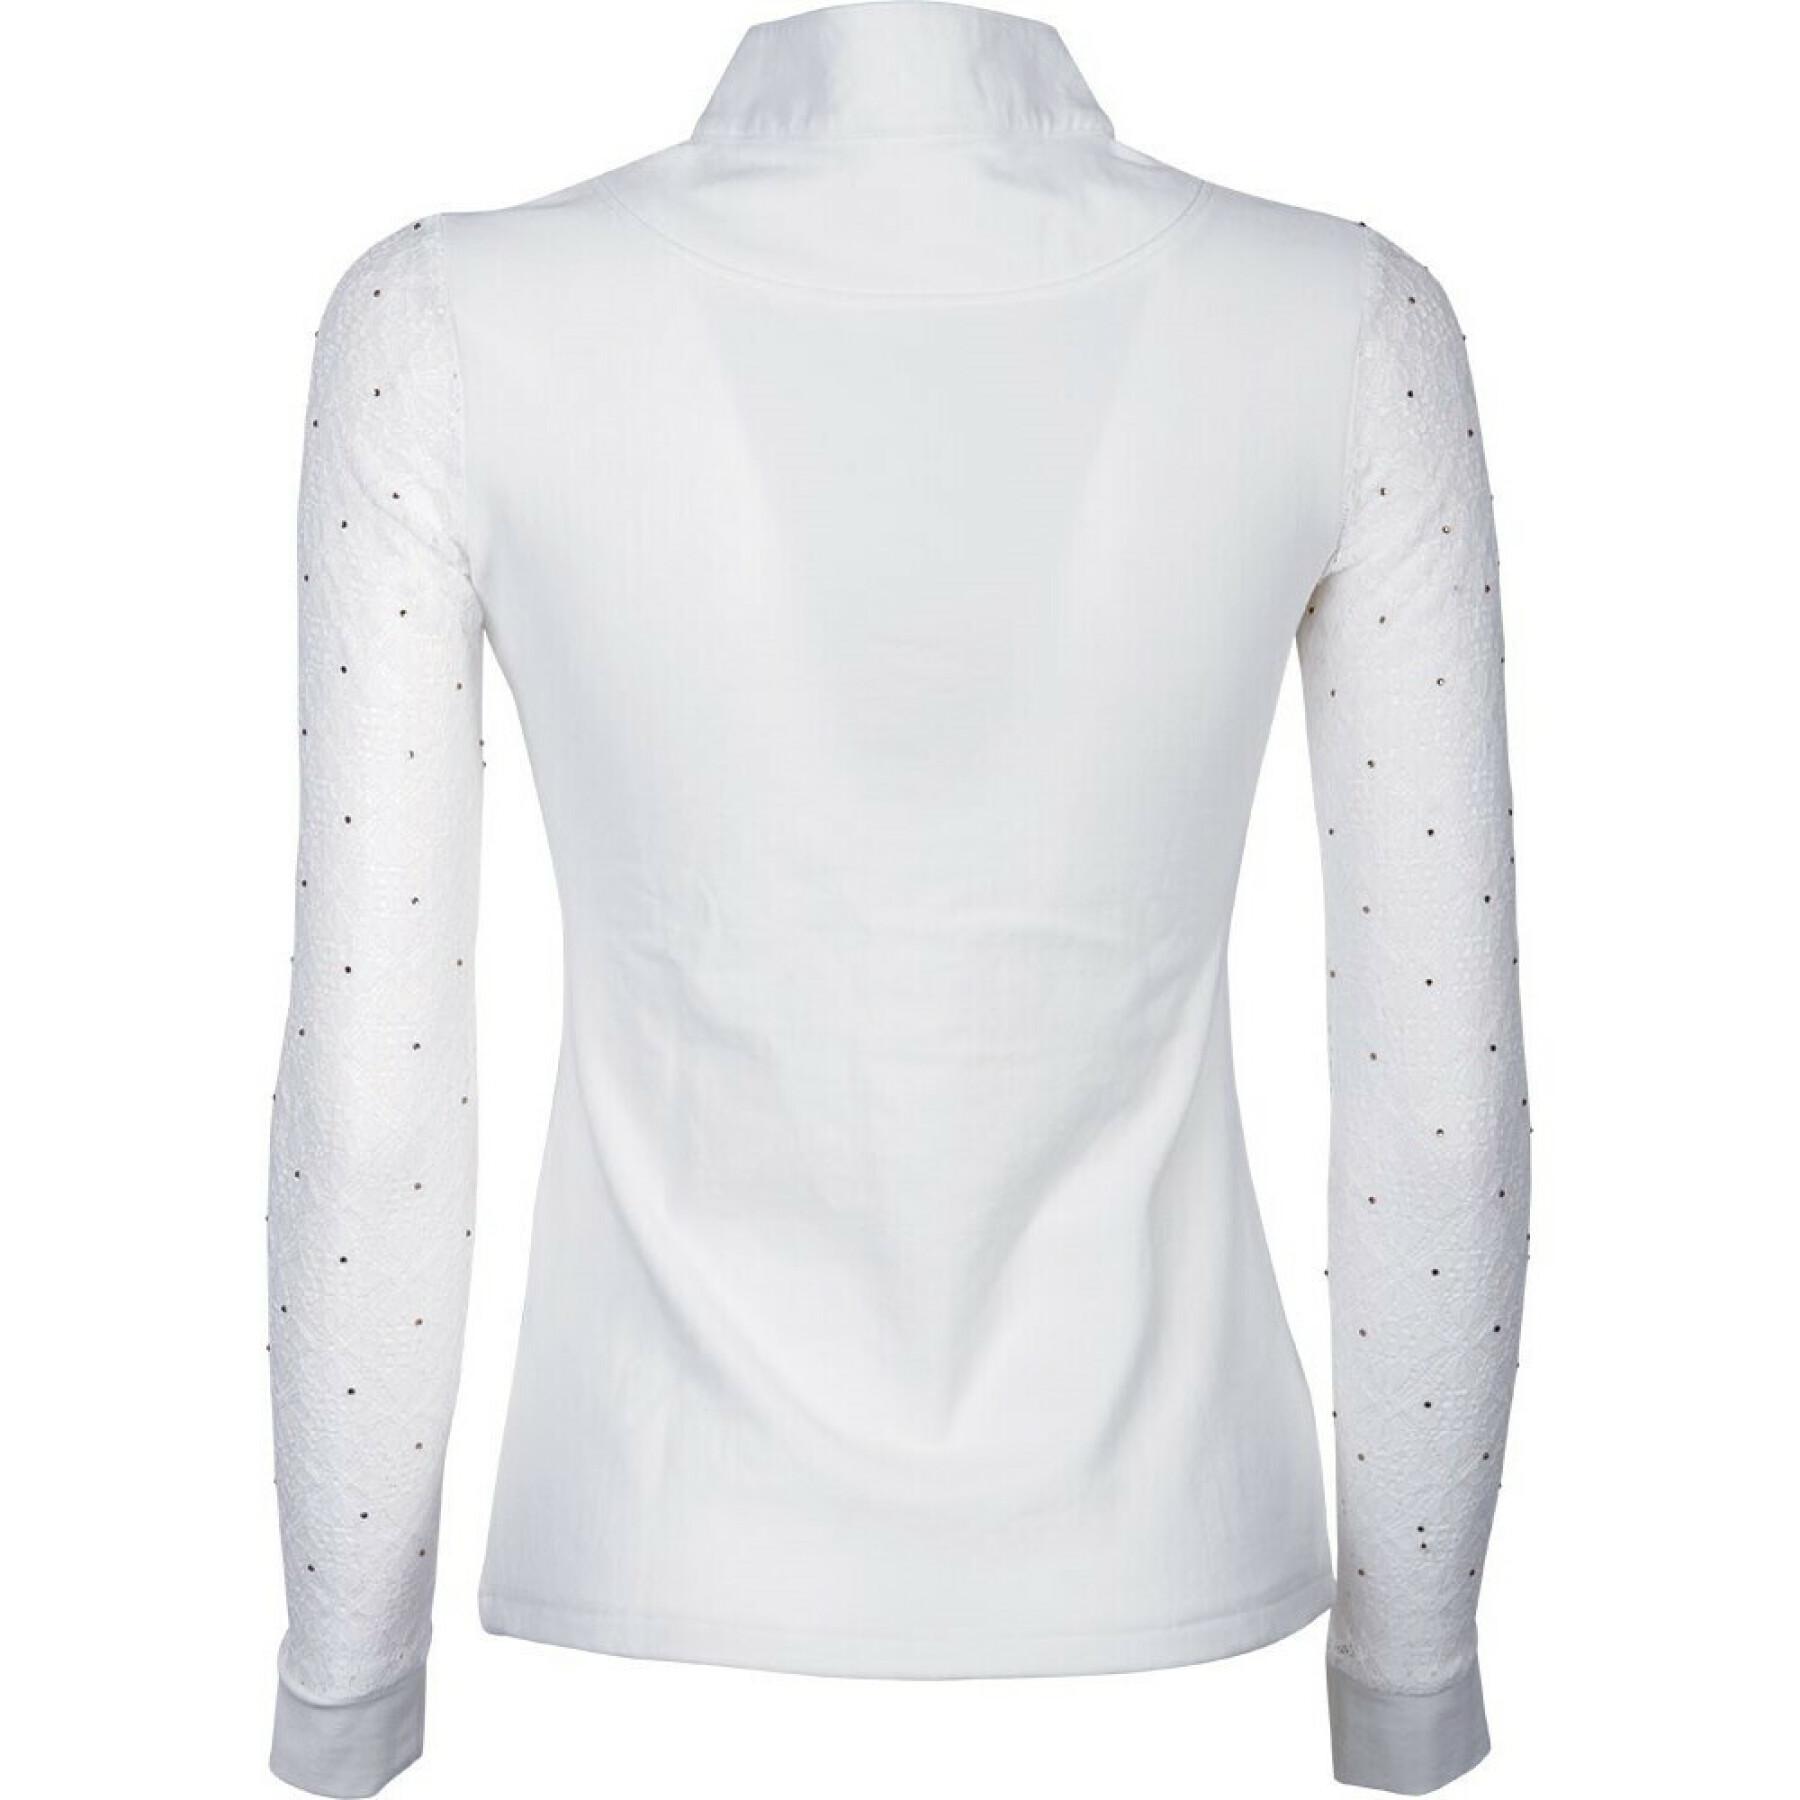 Women's competition shirt Harry's Horse EQS Crystal Lace